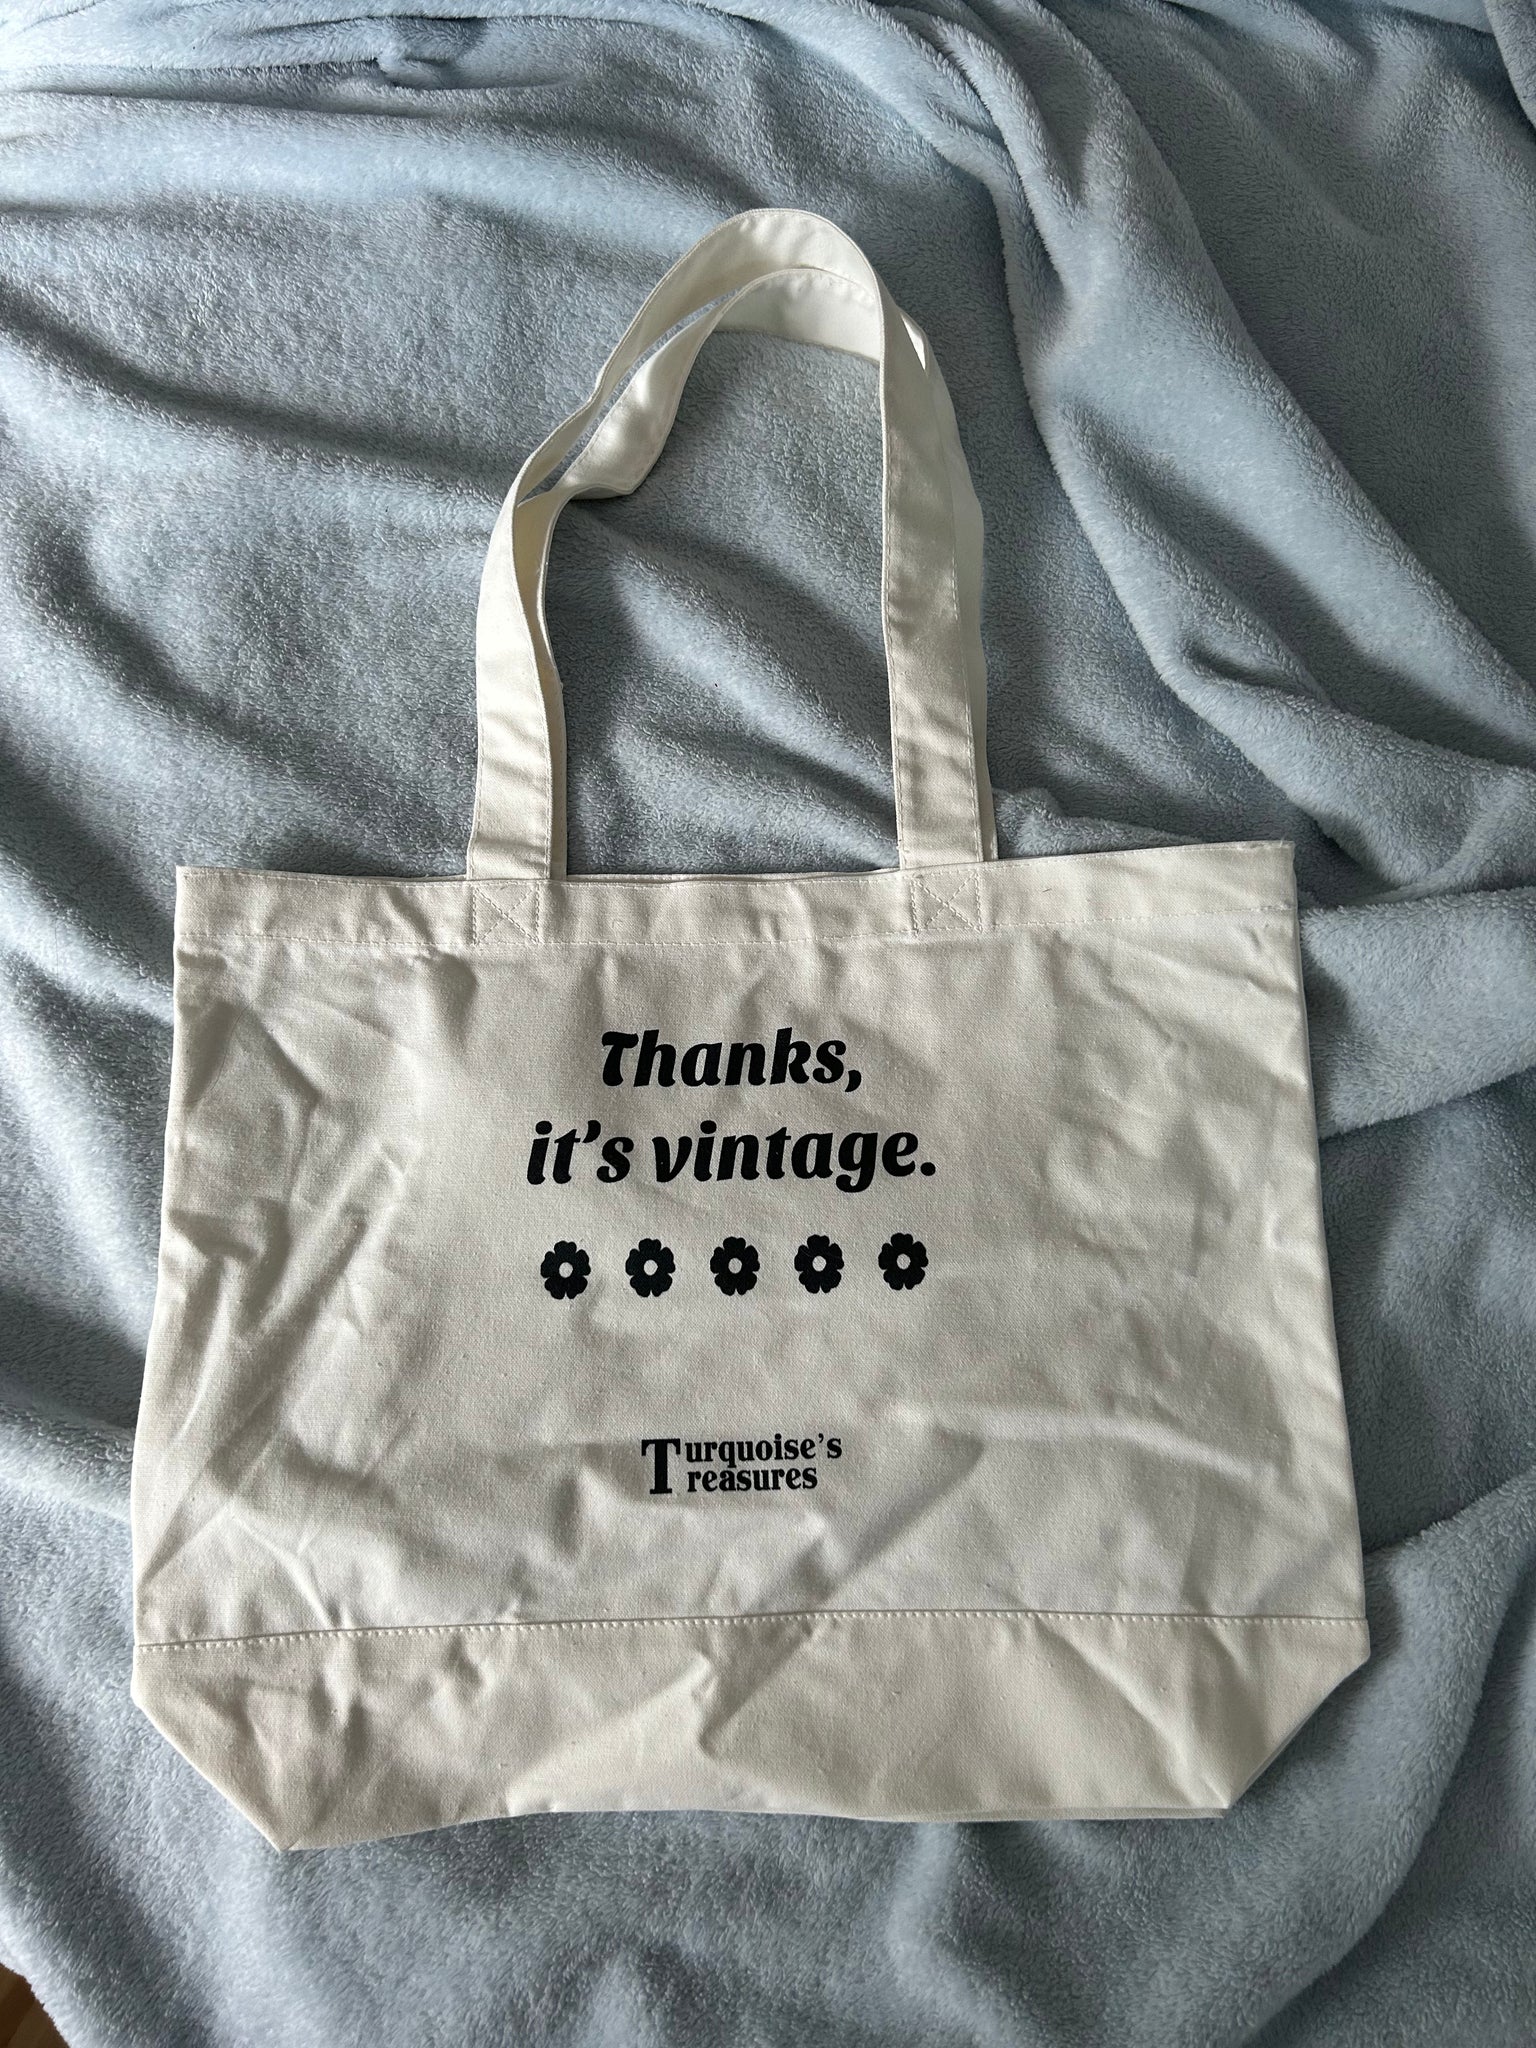 XL Thanks, it's vintage tote bag – Turquoise's Treasures